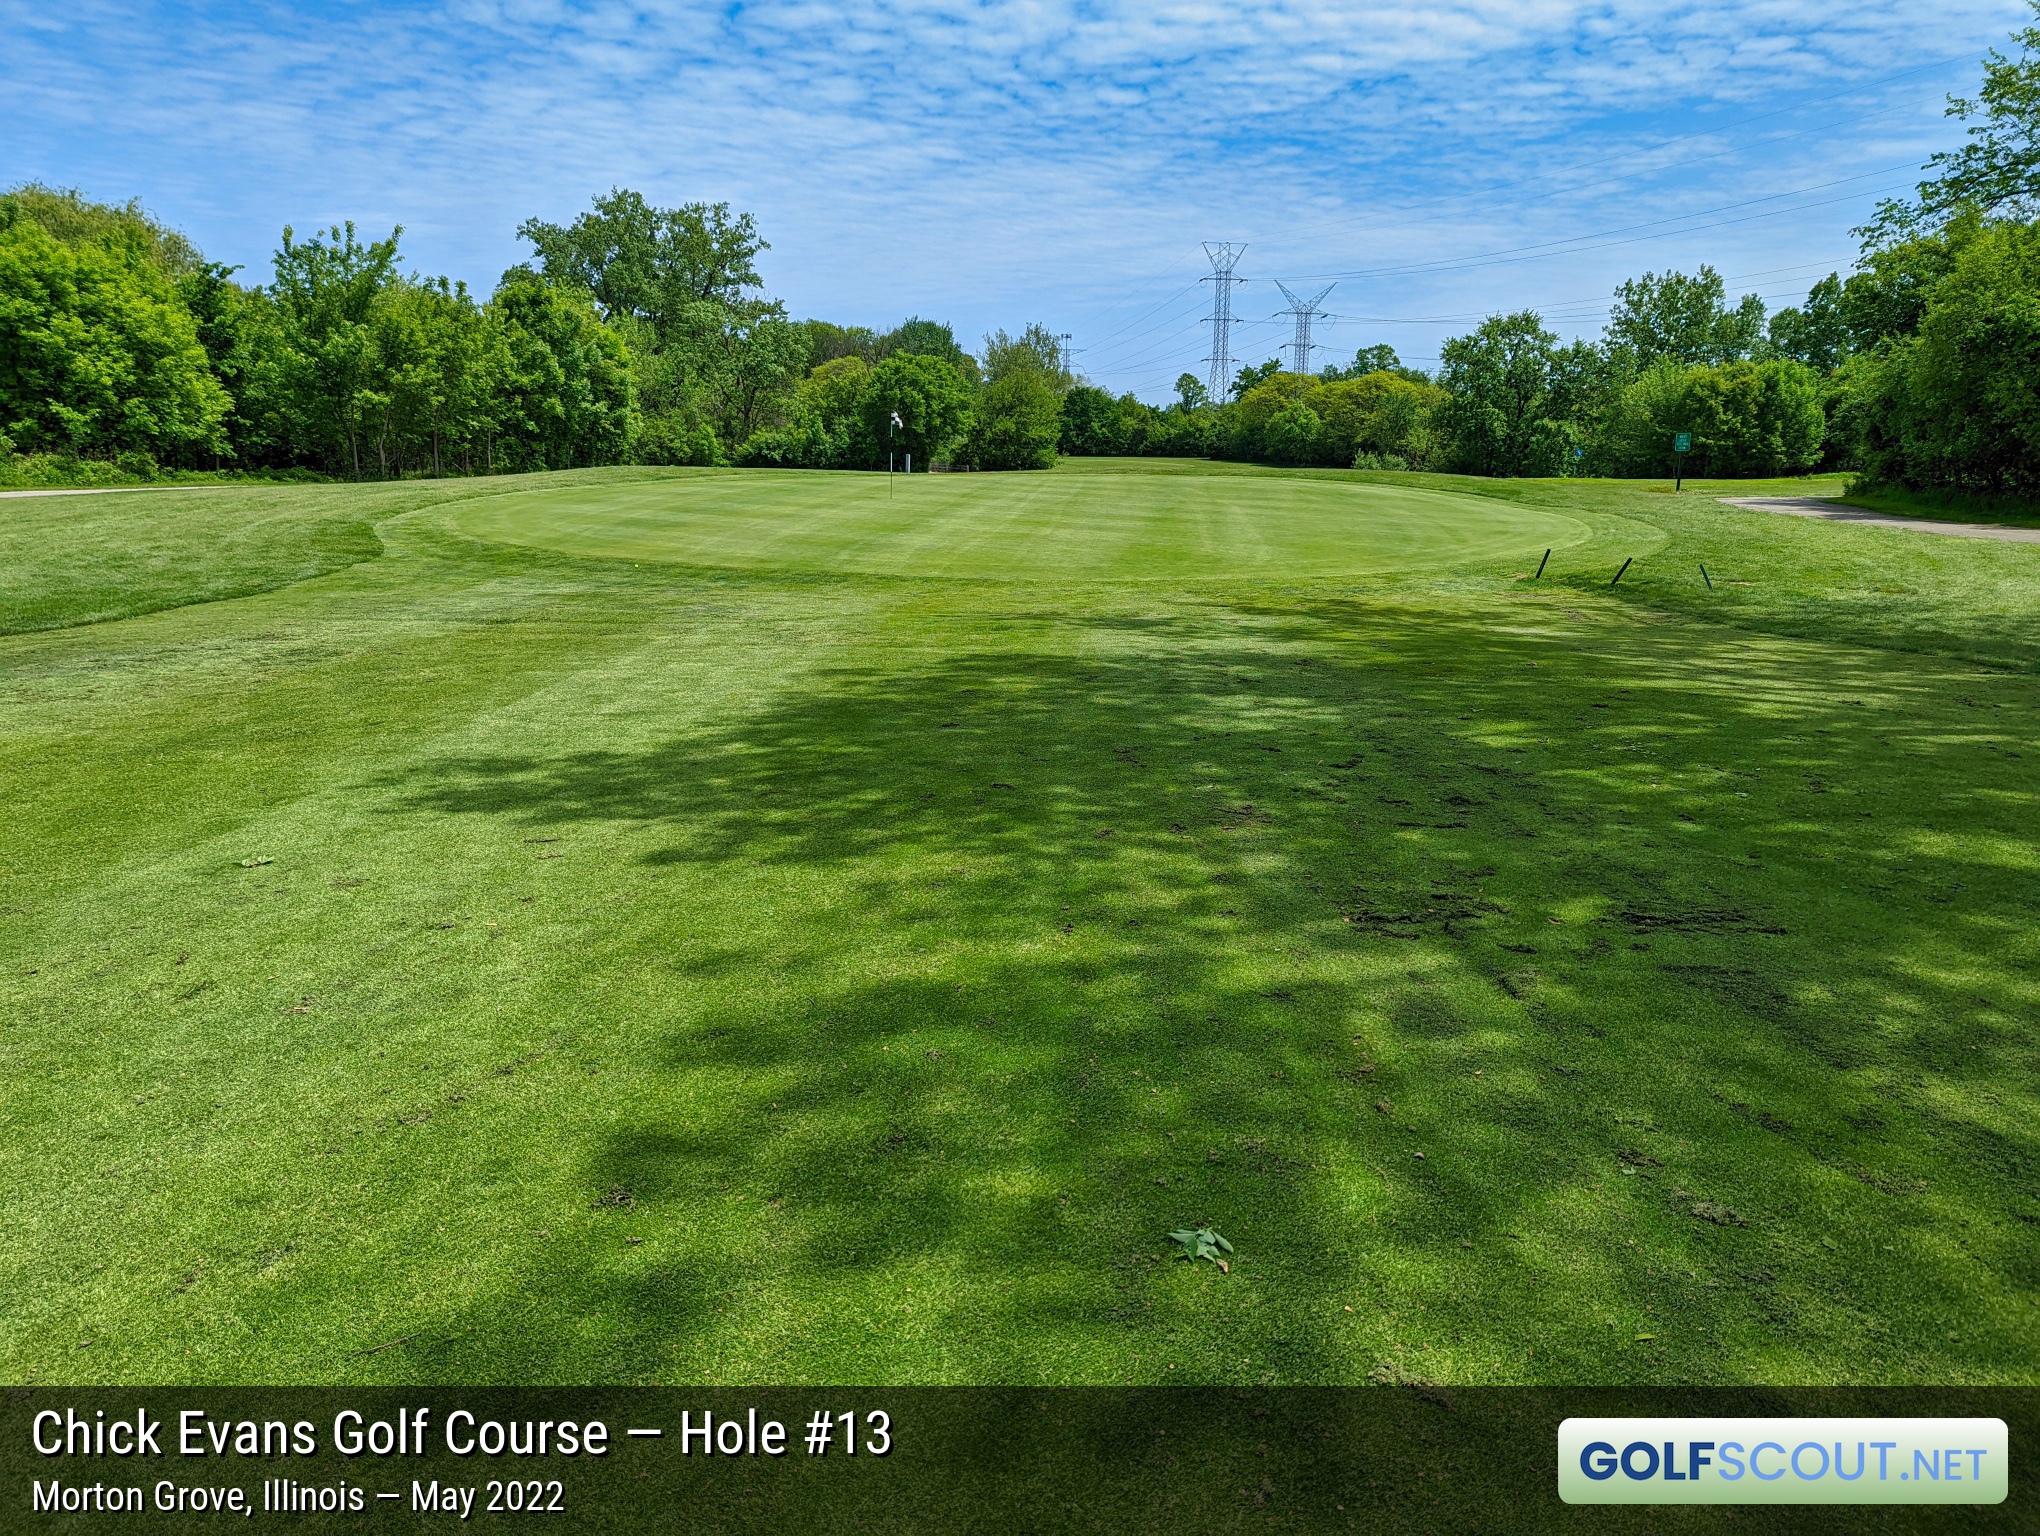 Photo of hole #13 at Chick Evans Golf Course in Morton Grove, Illinois. 